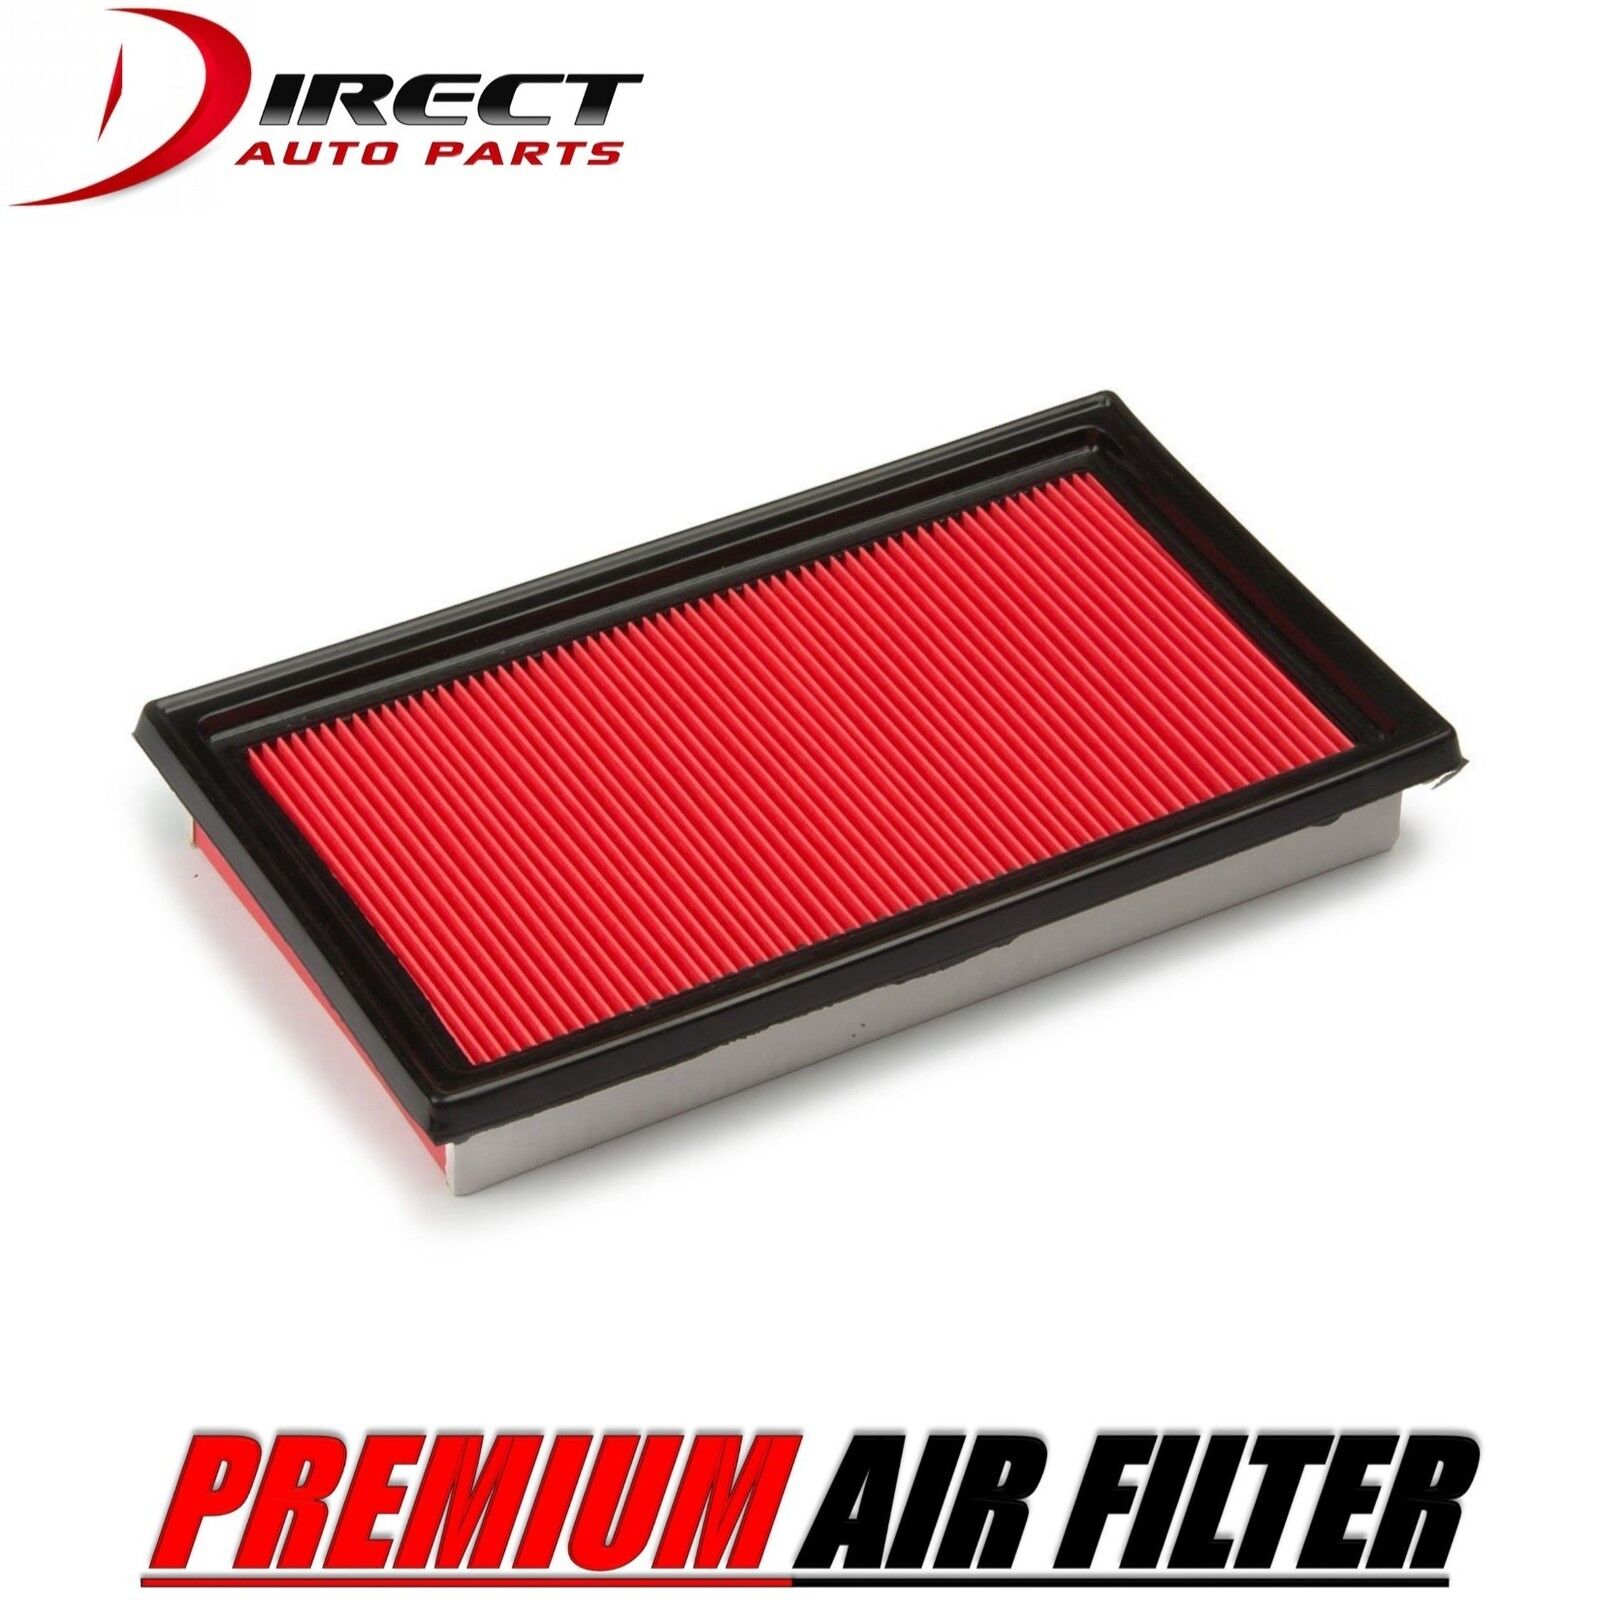 AIR FILTER FOR NISSAN FITS CUBE 1.8L ENGINE 2014 - 2009